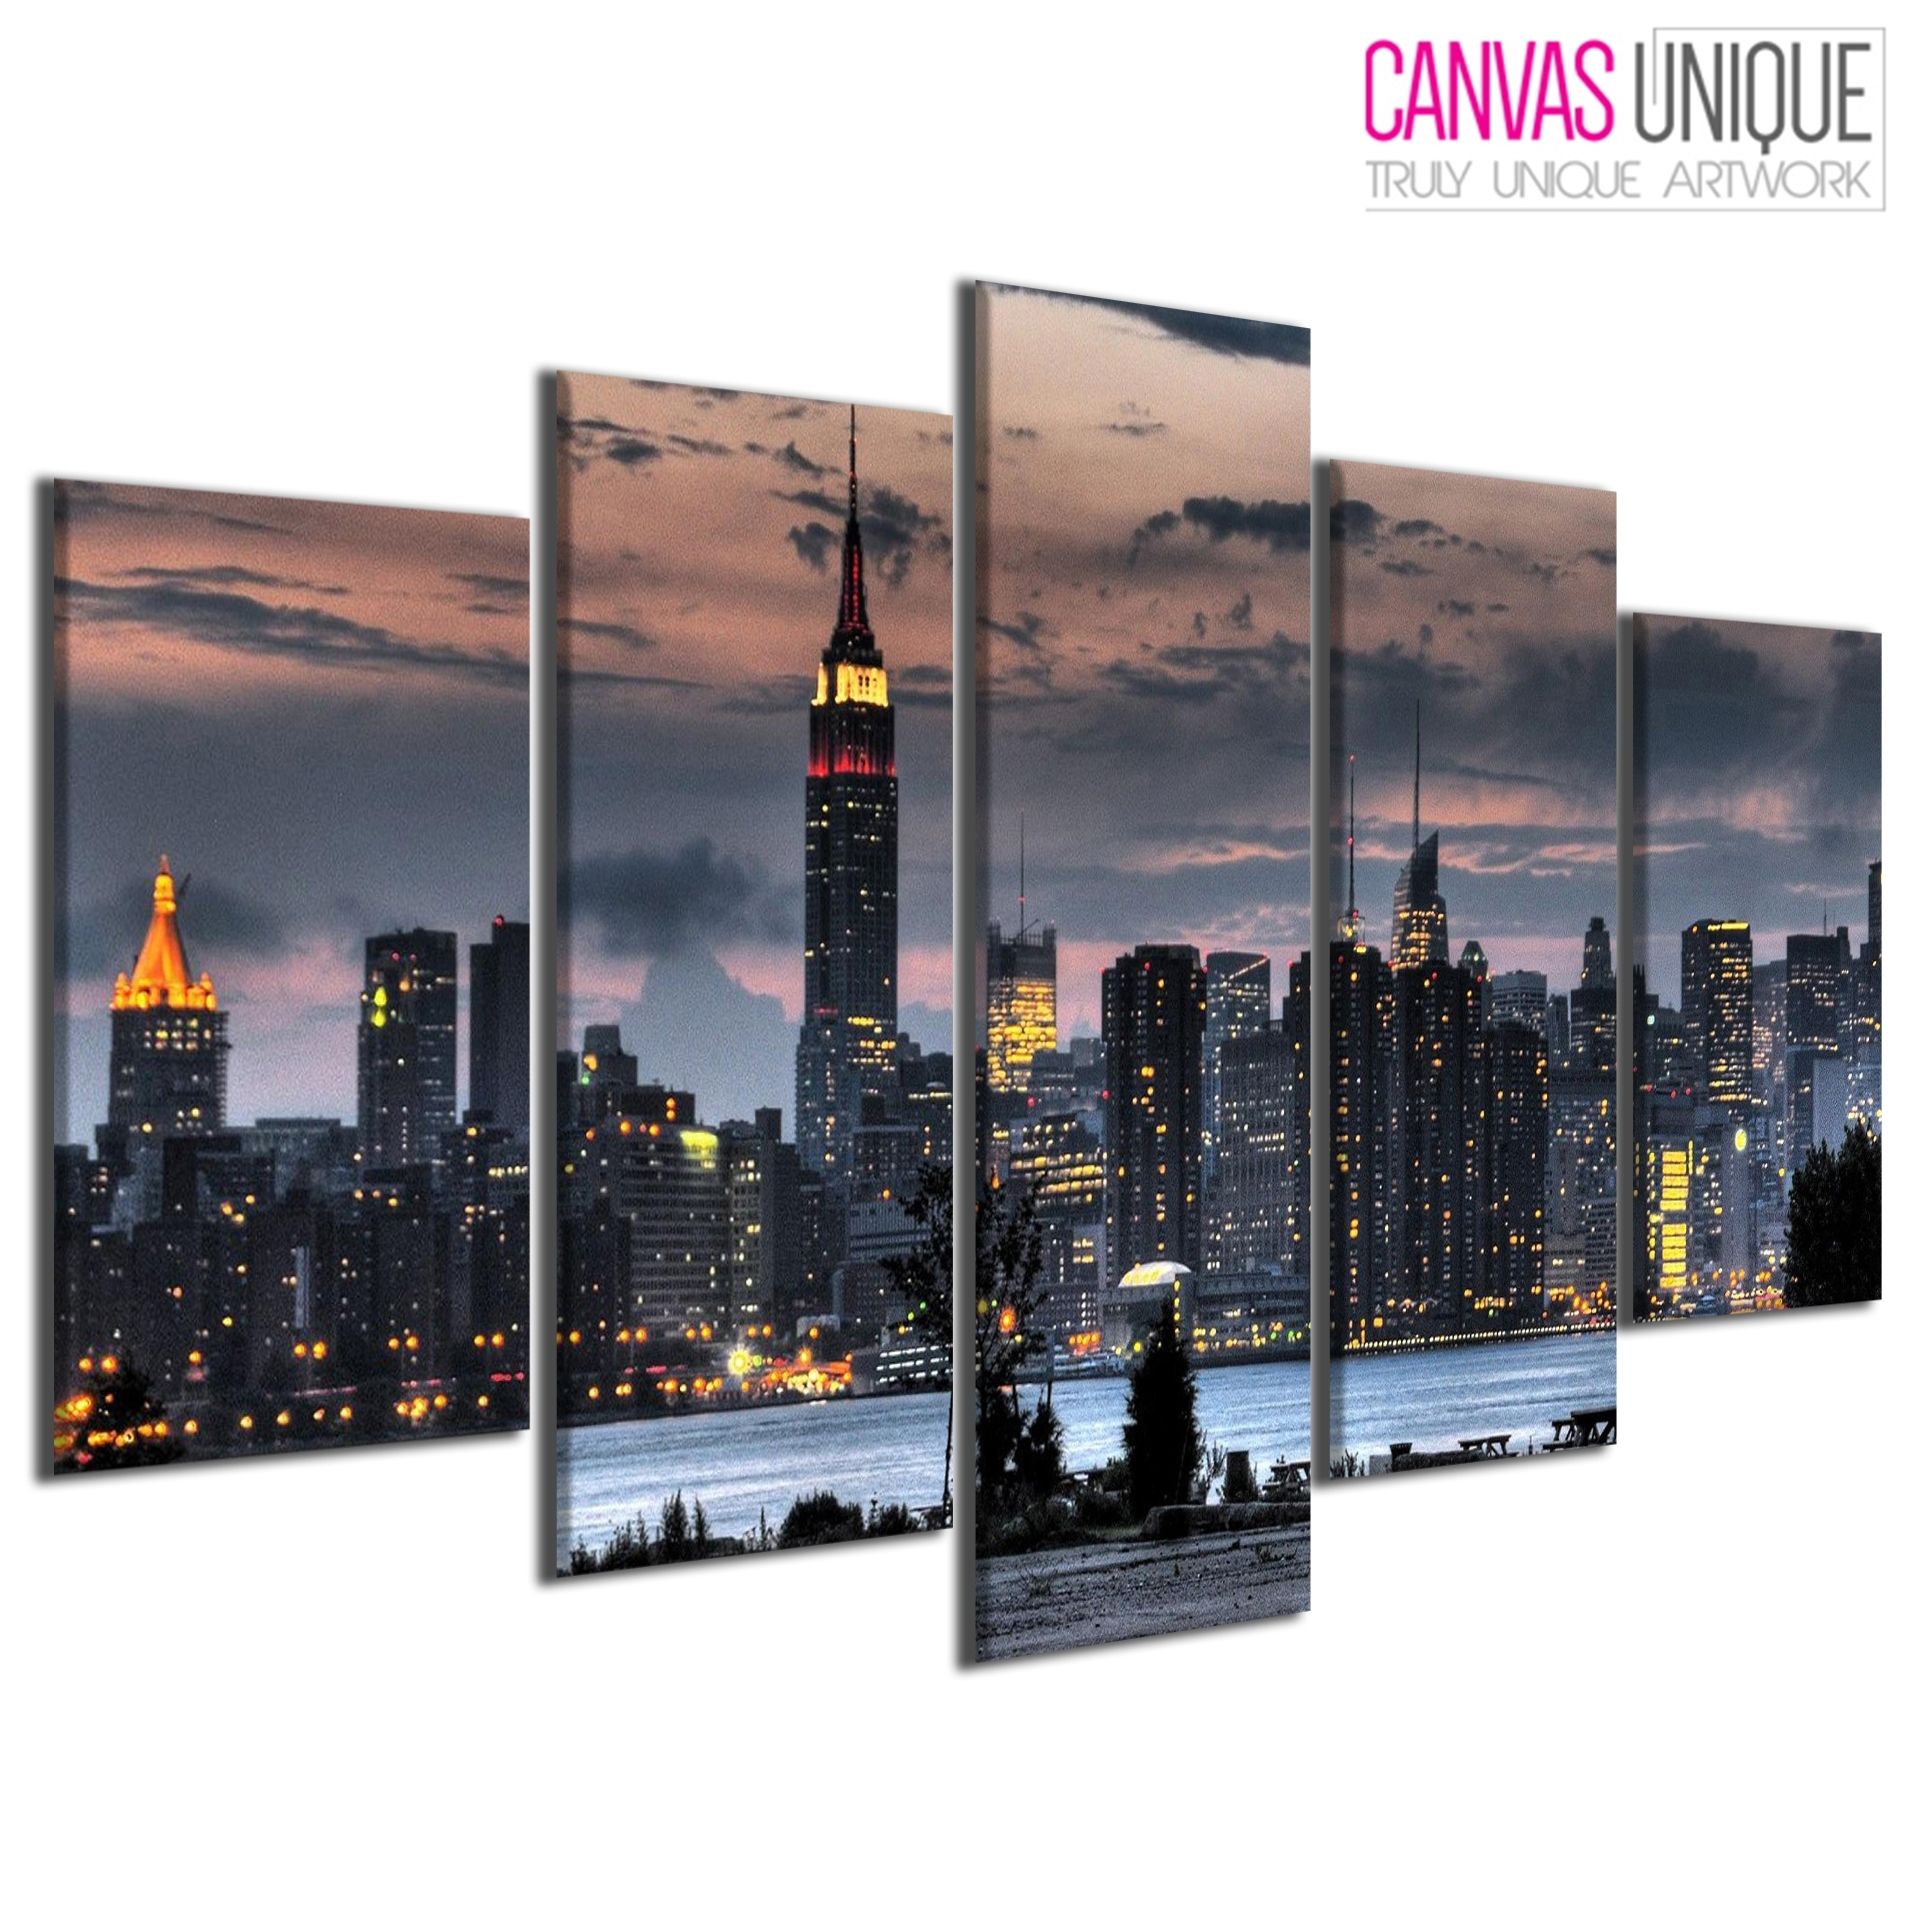 Pc148 New York Cityscape Scenic Multi Frame Canvas Wall Art Print | Ebay Inside New York Canvas Wall Art (View 14 of 20)